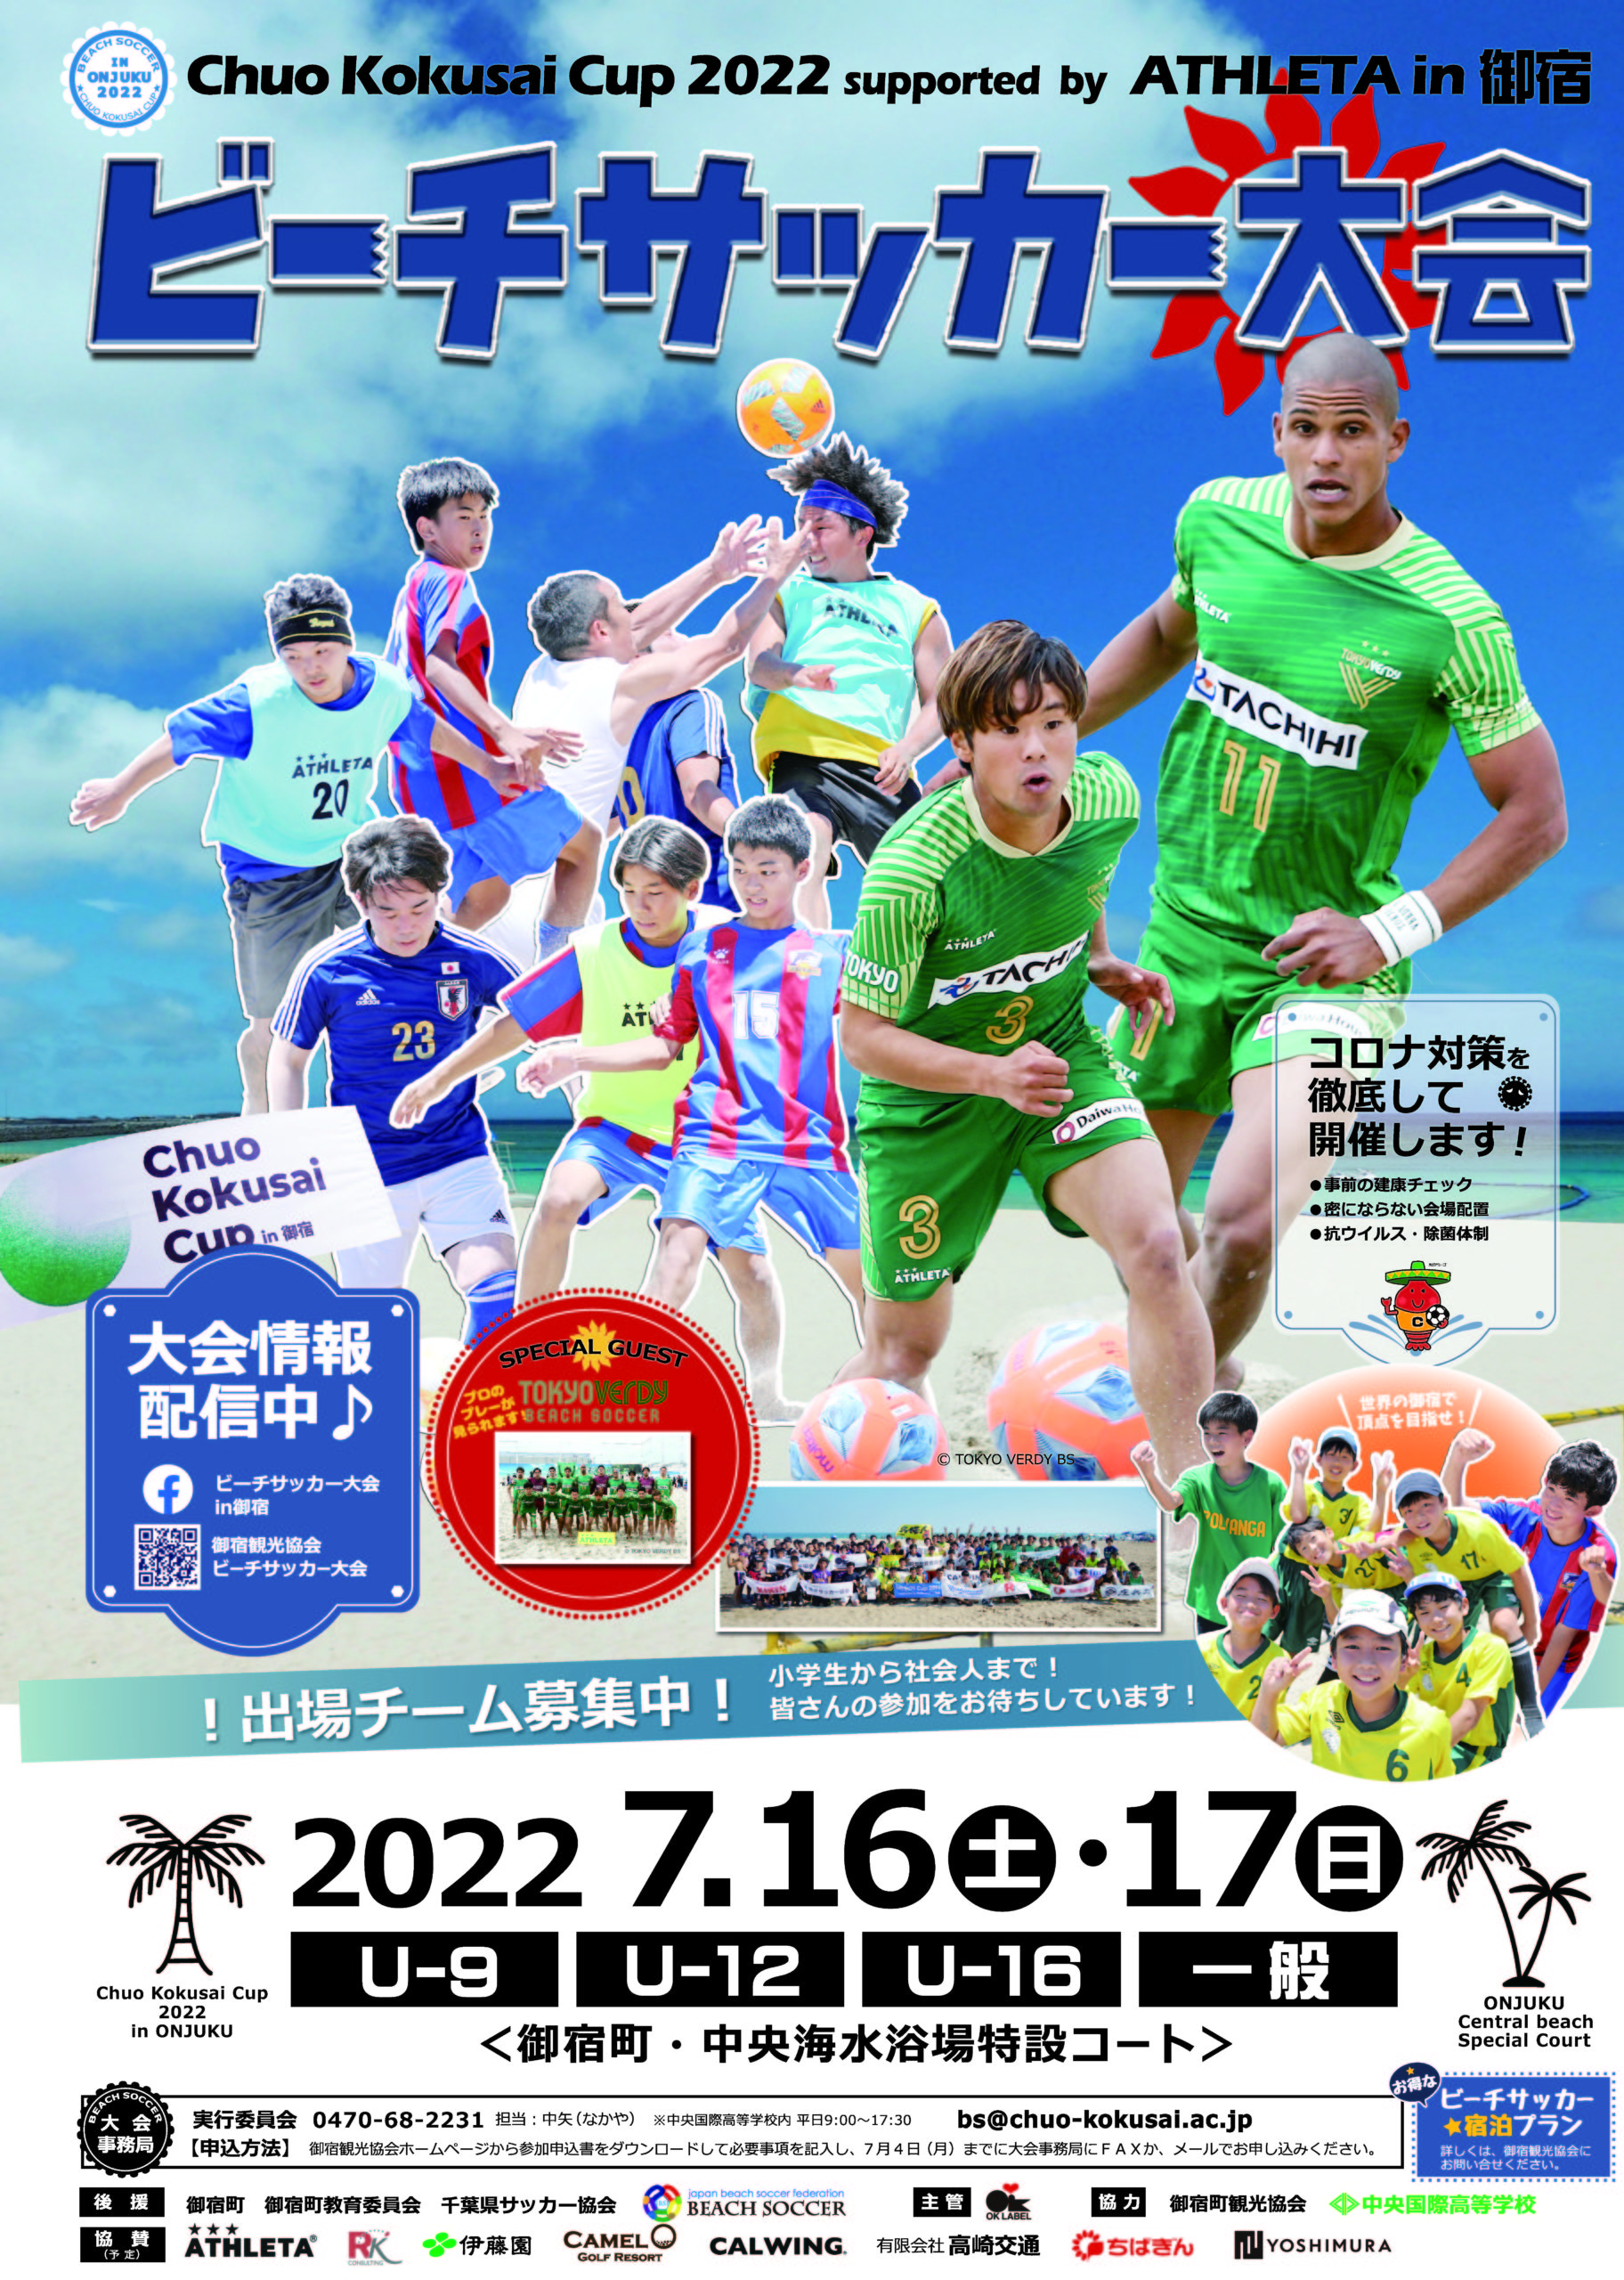 Chuo Kokusai Cup 2022 supported by ATHLETA in 御宿協賛のお知らせ